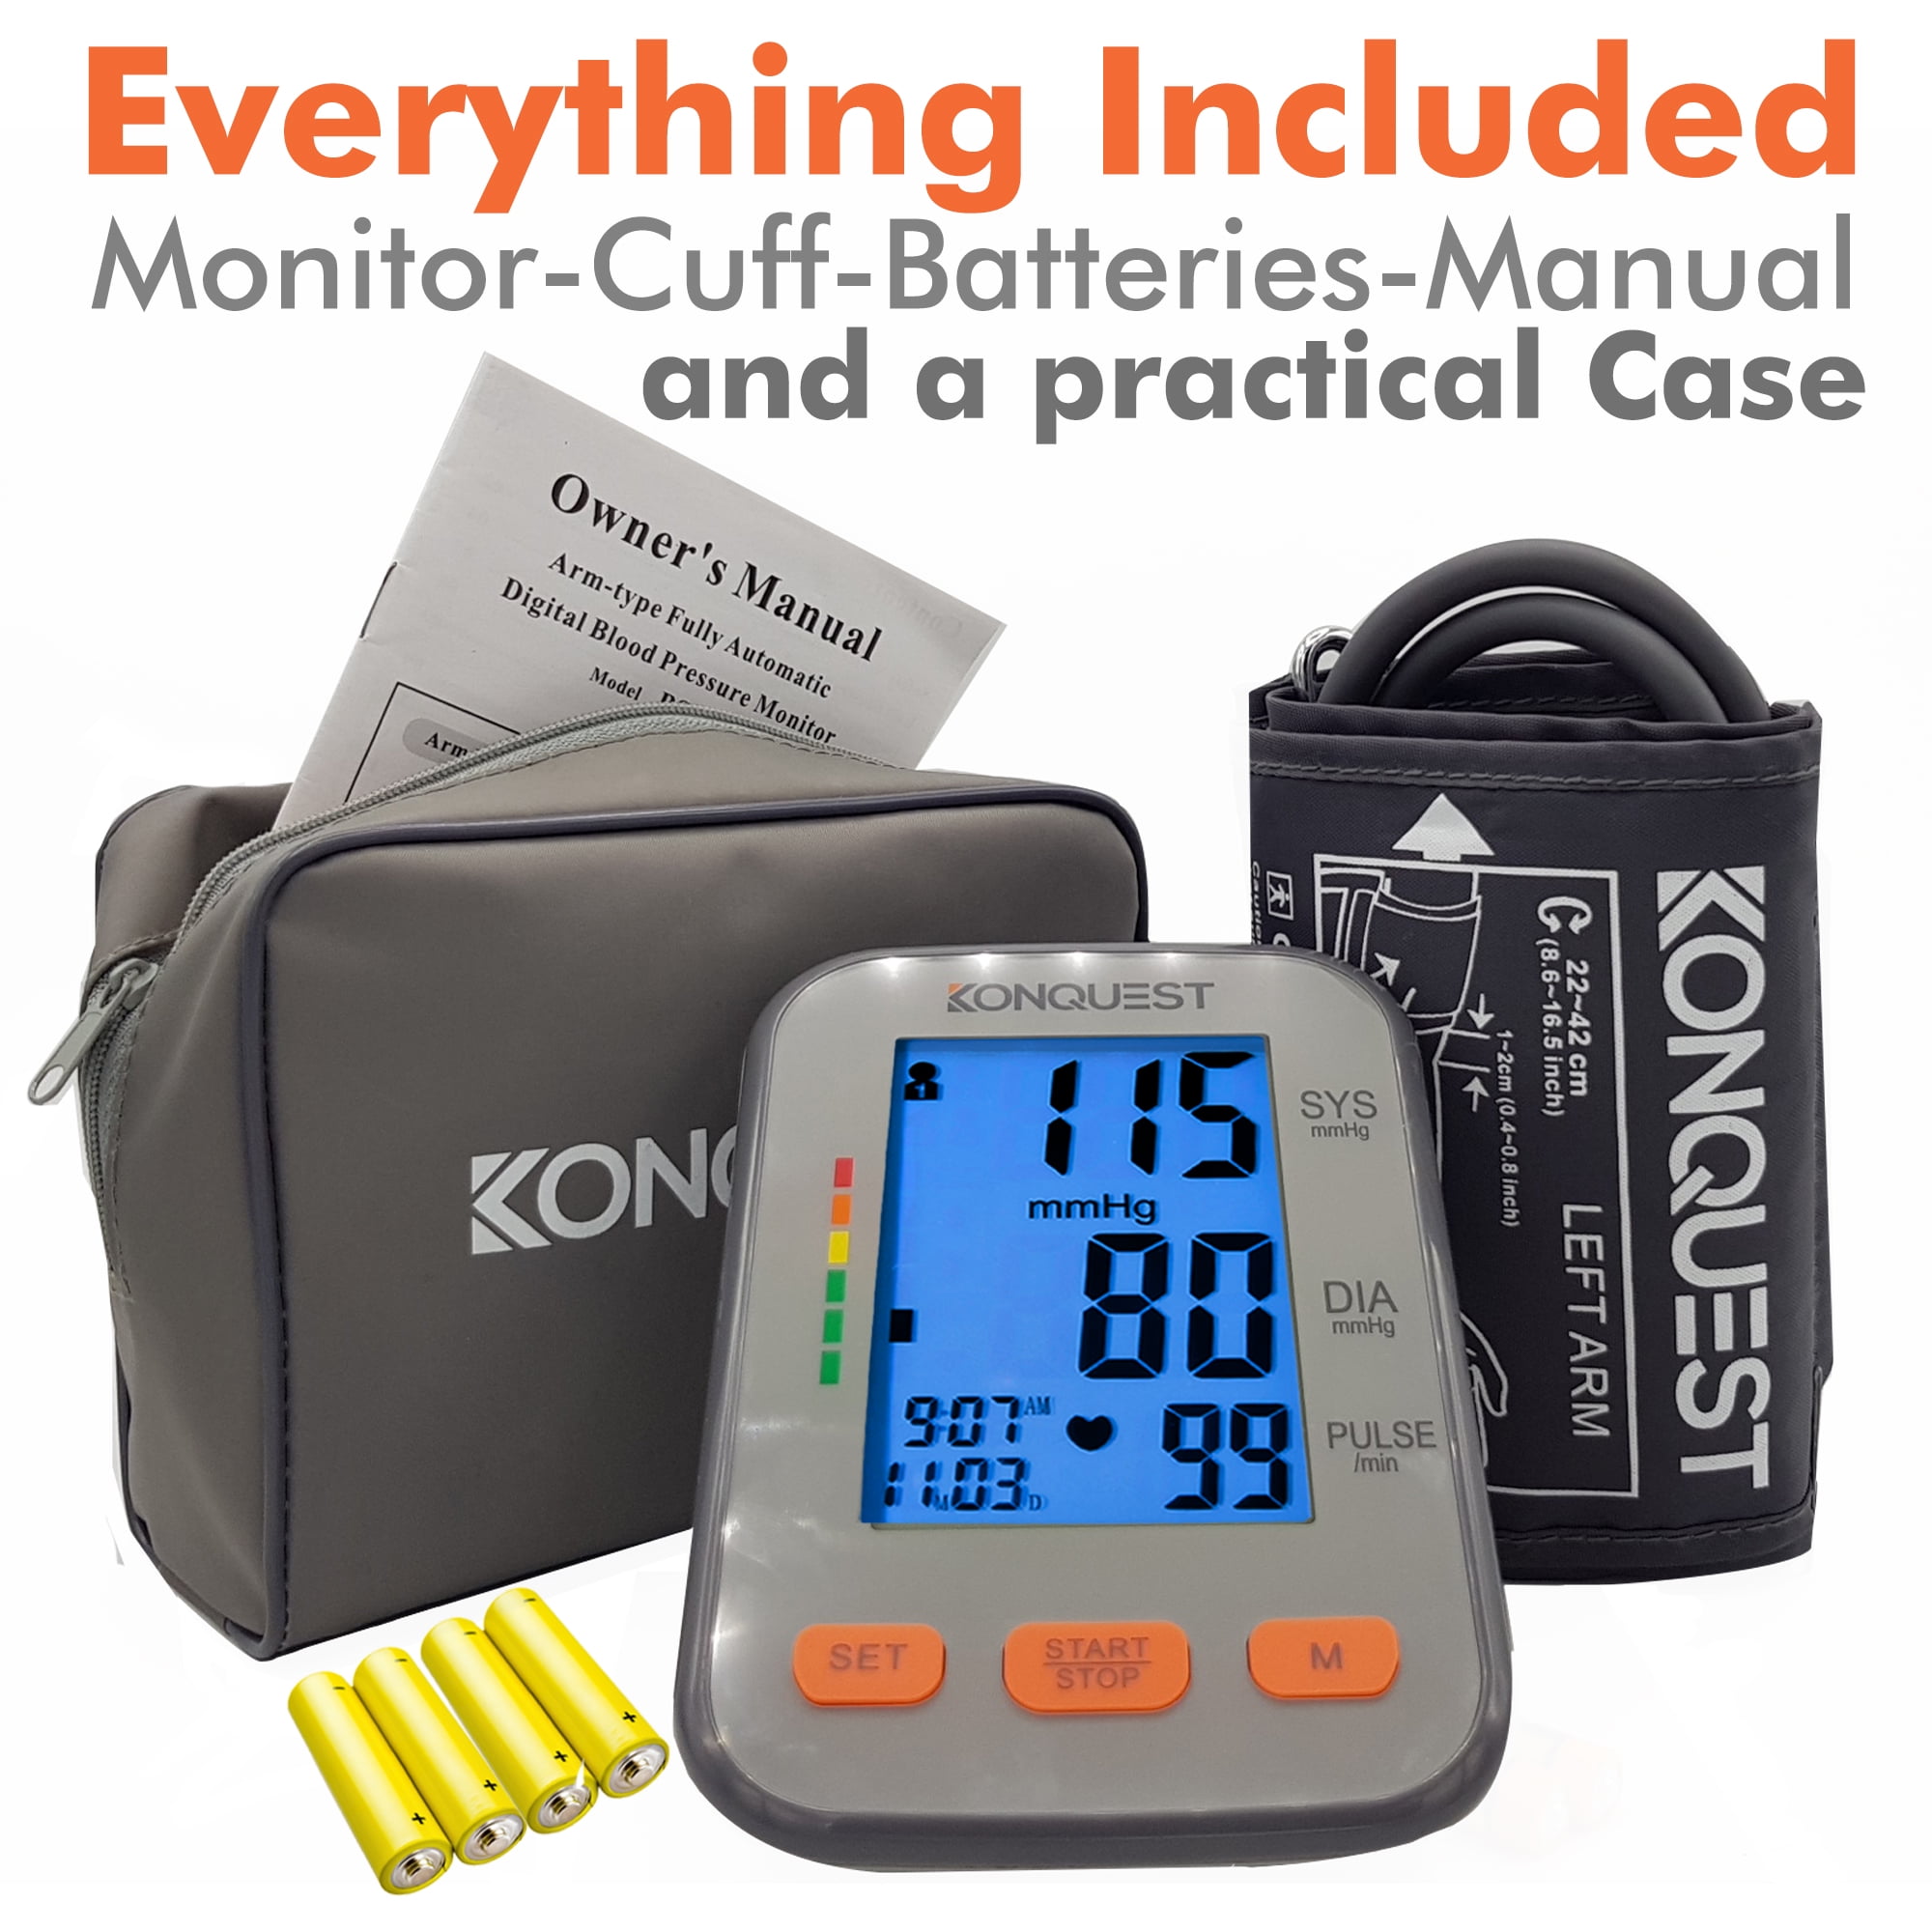 Konquest Wrist Blood Pressure Monitor Tested W/Storage Case and Batteries